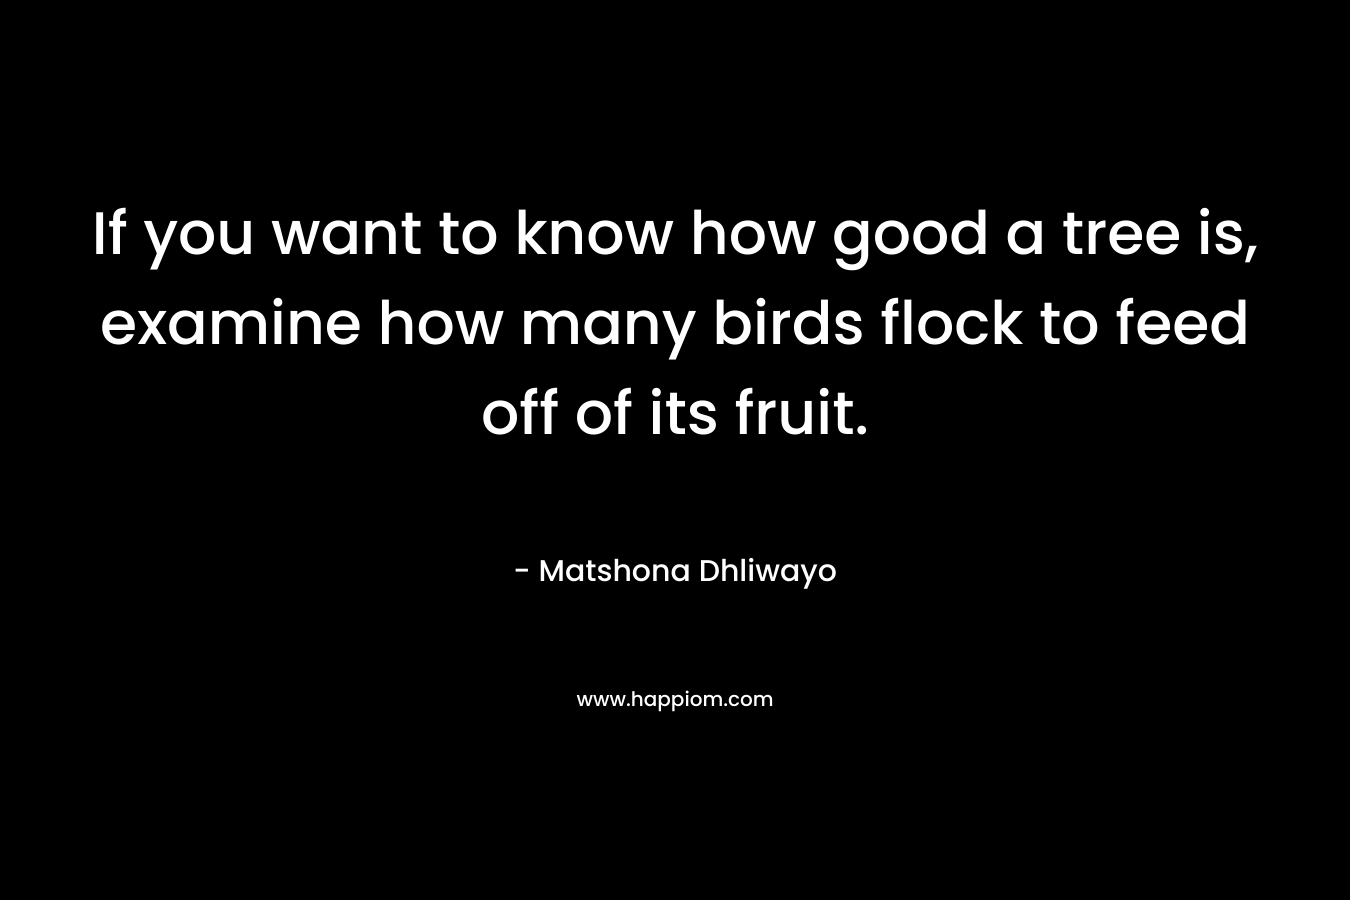 If you want to know how good a tree is, examine how many birds flock to feed off of its fruit.